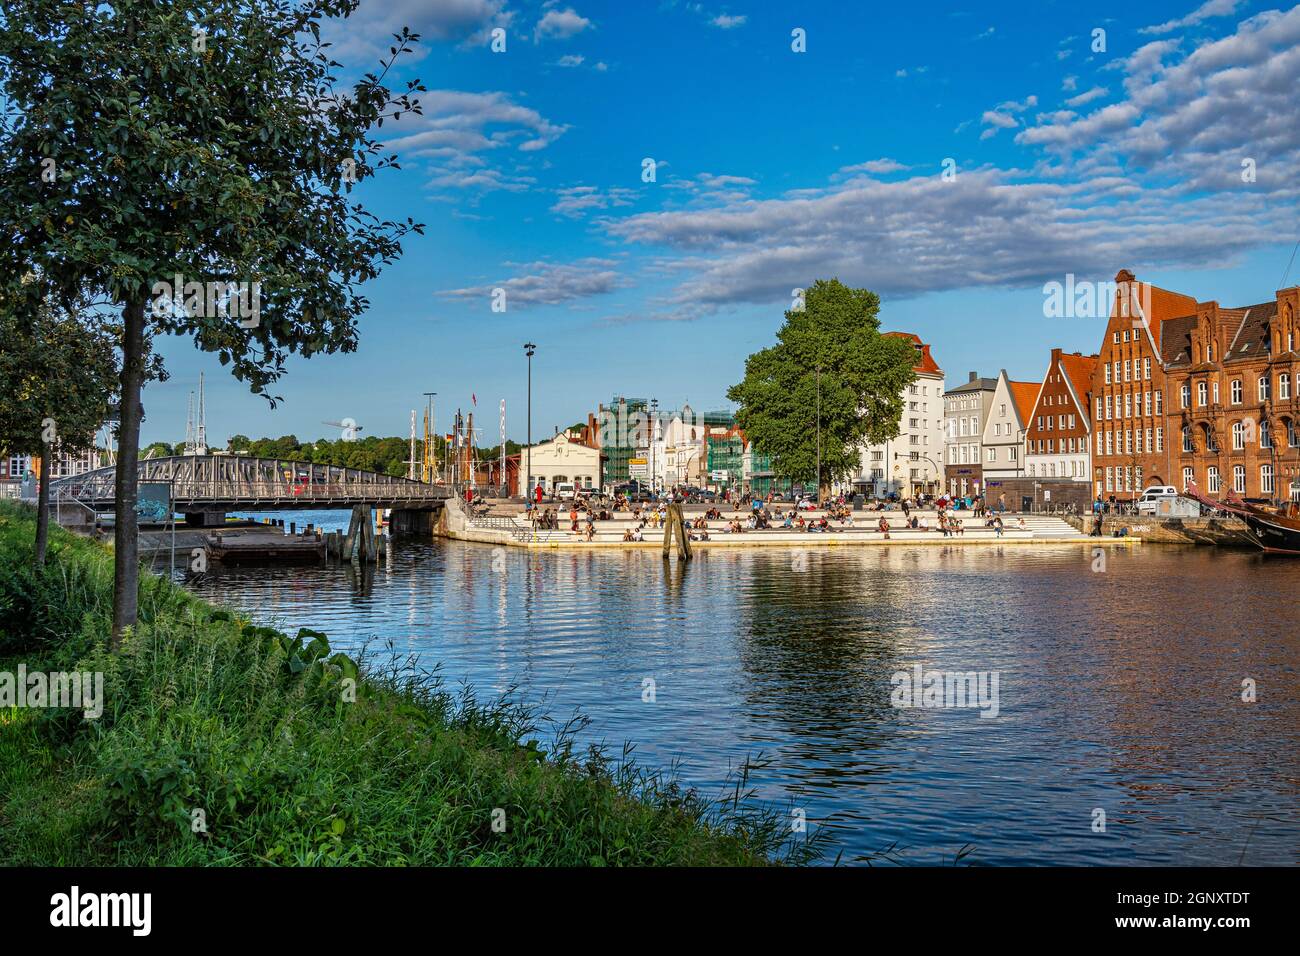 Landscape of the city of Lübeck at the square of the Swivel Bridge over the river Trave. Lübeck, Land Schleswig-Holstein, Germany, Europe Stock Photo